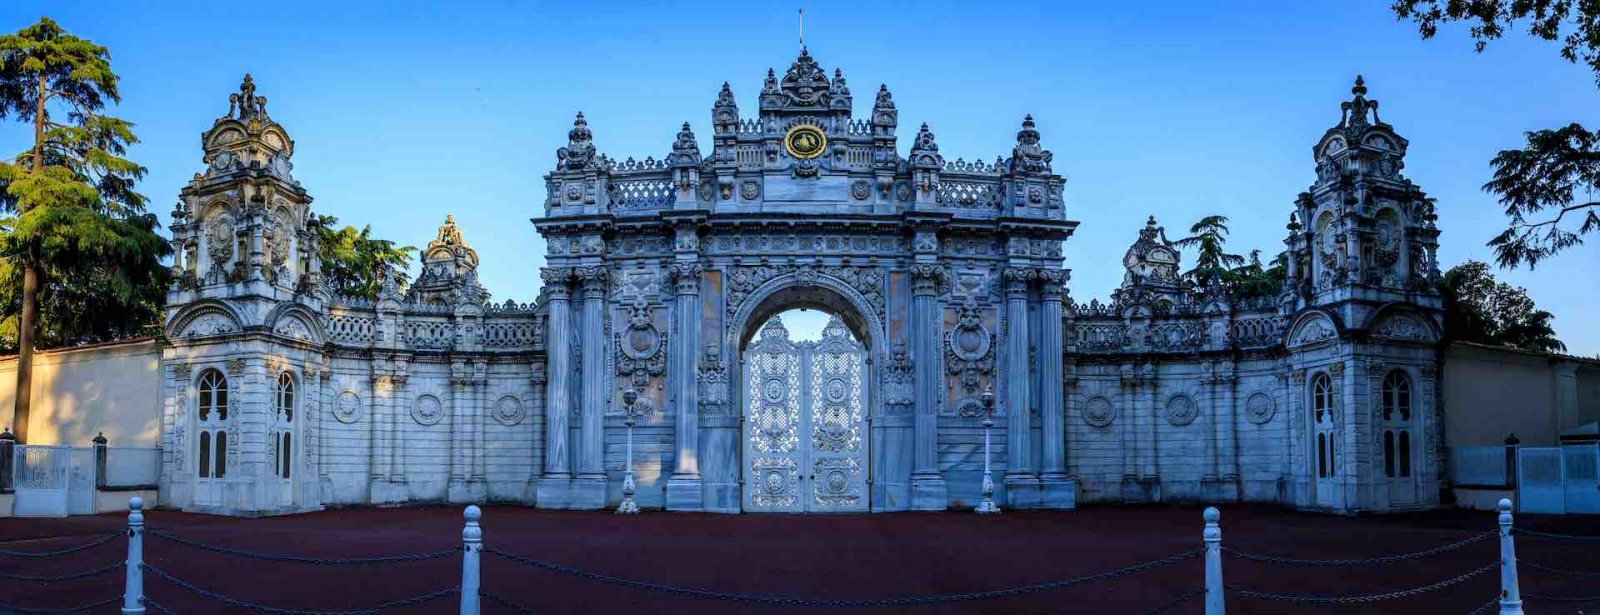 Dolmabahçe Palace - located in the Beşiktaş district of Istanbul, Turkey, on the European coast of the Bosporus Strait